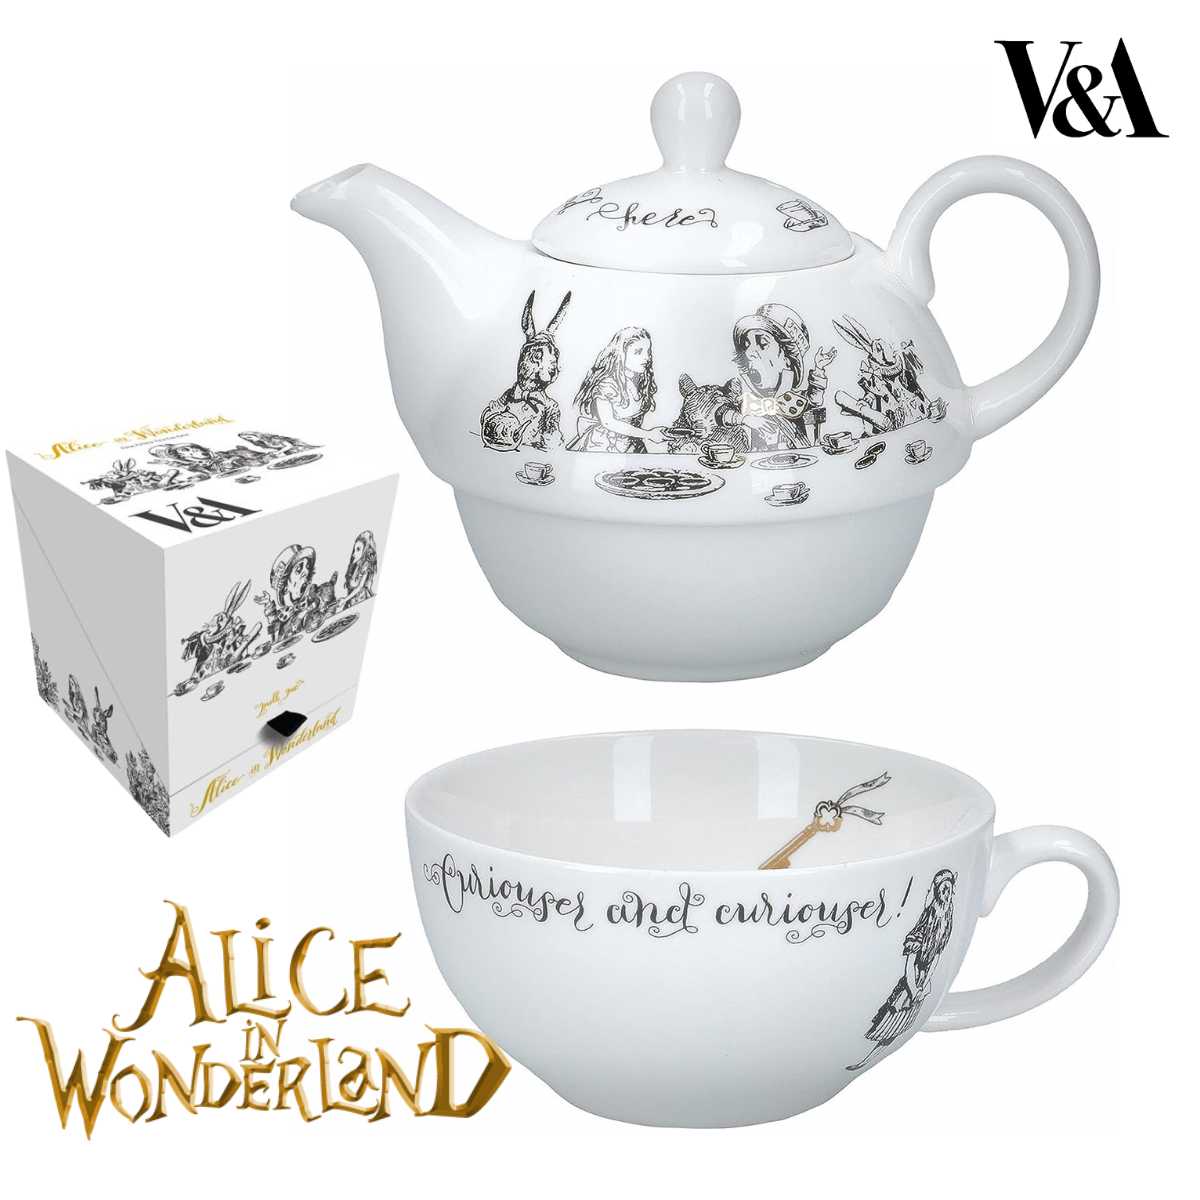 Victoria And Albert Alice In Wonderland V A Alice Tea for one ポット カップ ヴィクトリア アルバートアリス イン ワンダーランド ギフト 贈答品 プレゼント 御祝 記念品 食器 ポット カップ セット ファインチャイナ